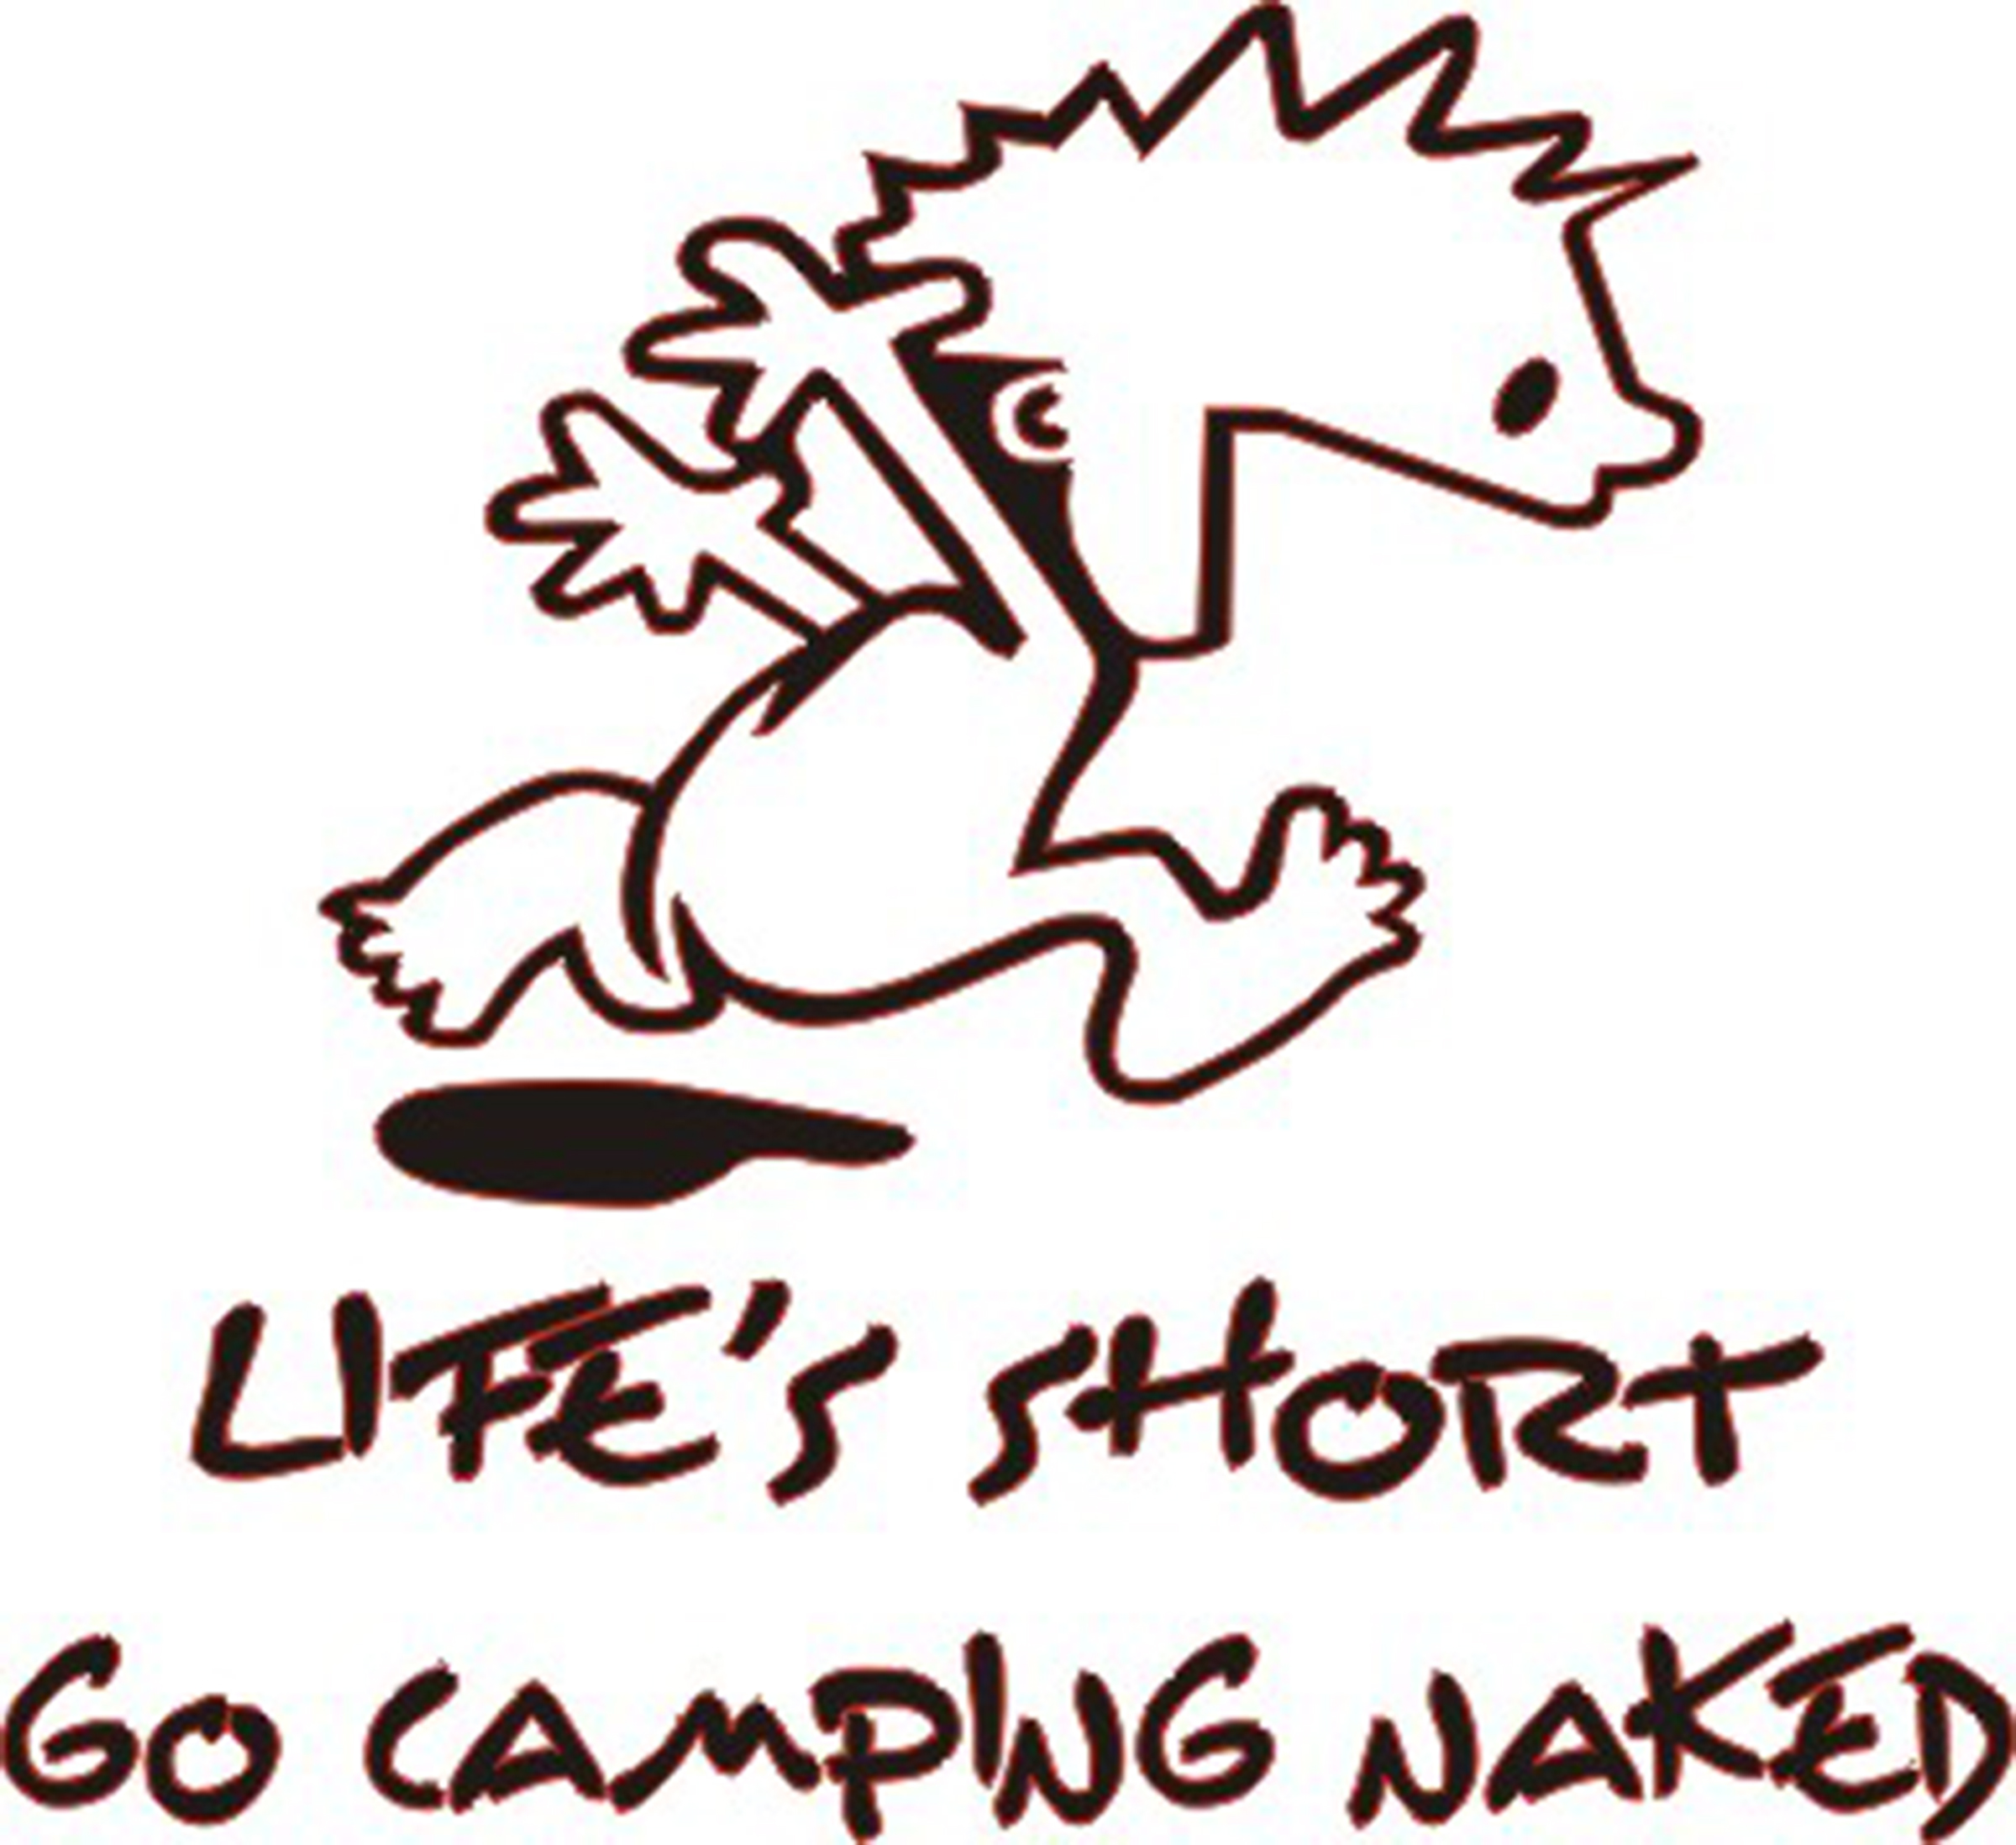 Lifes Short, Go Camping Naked Sticker